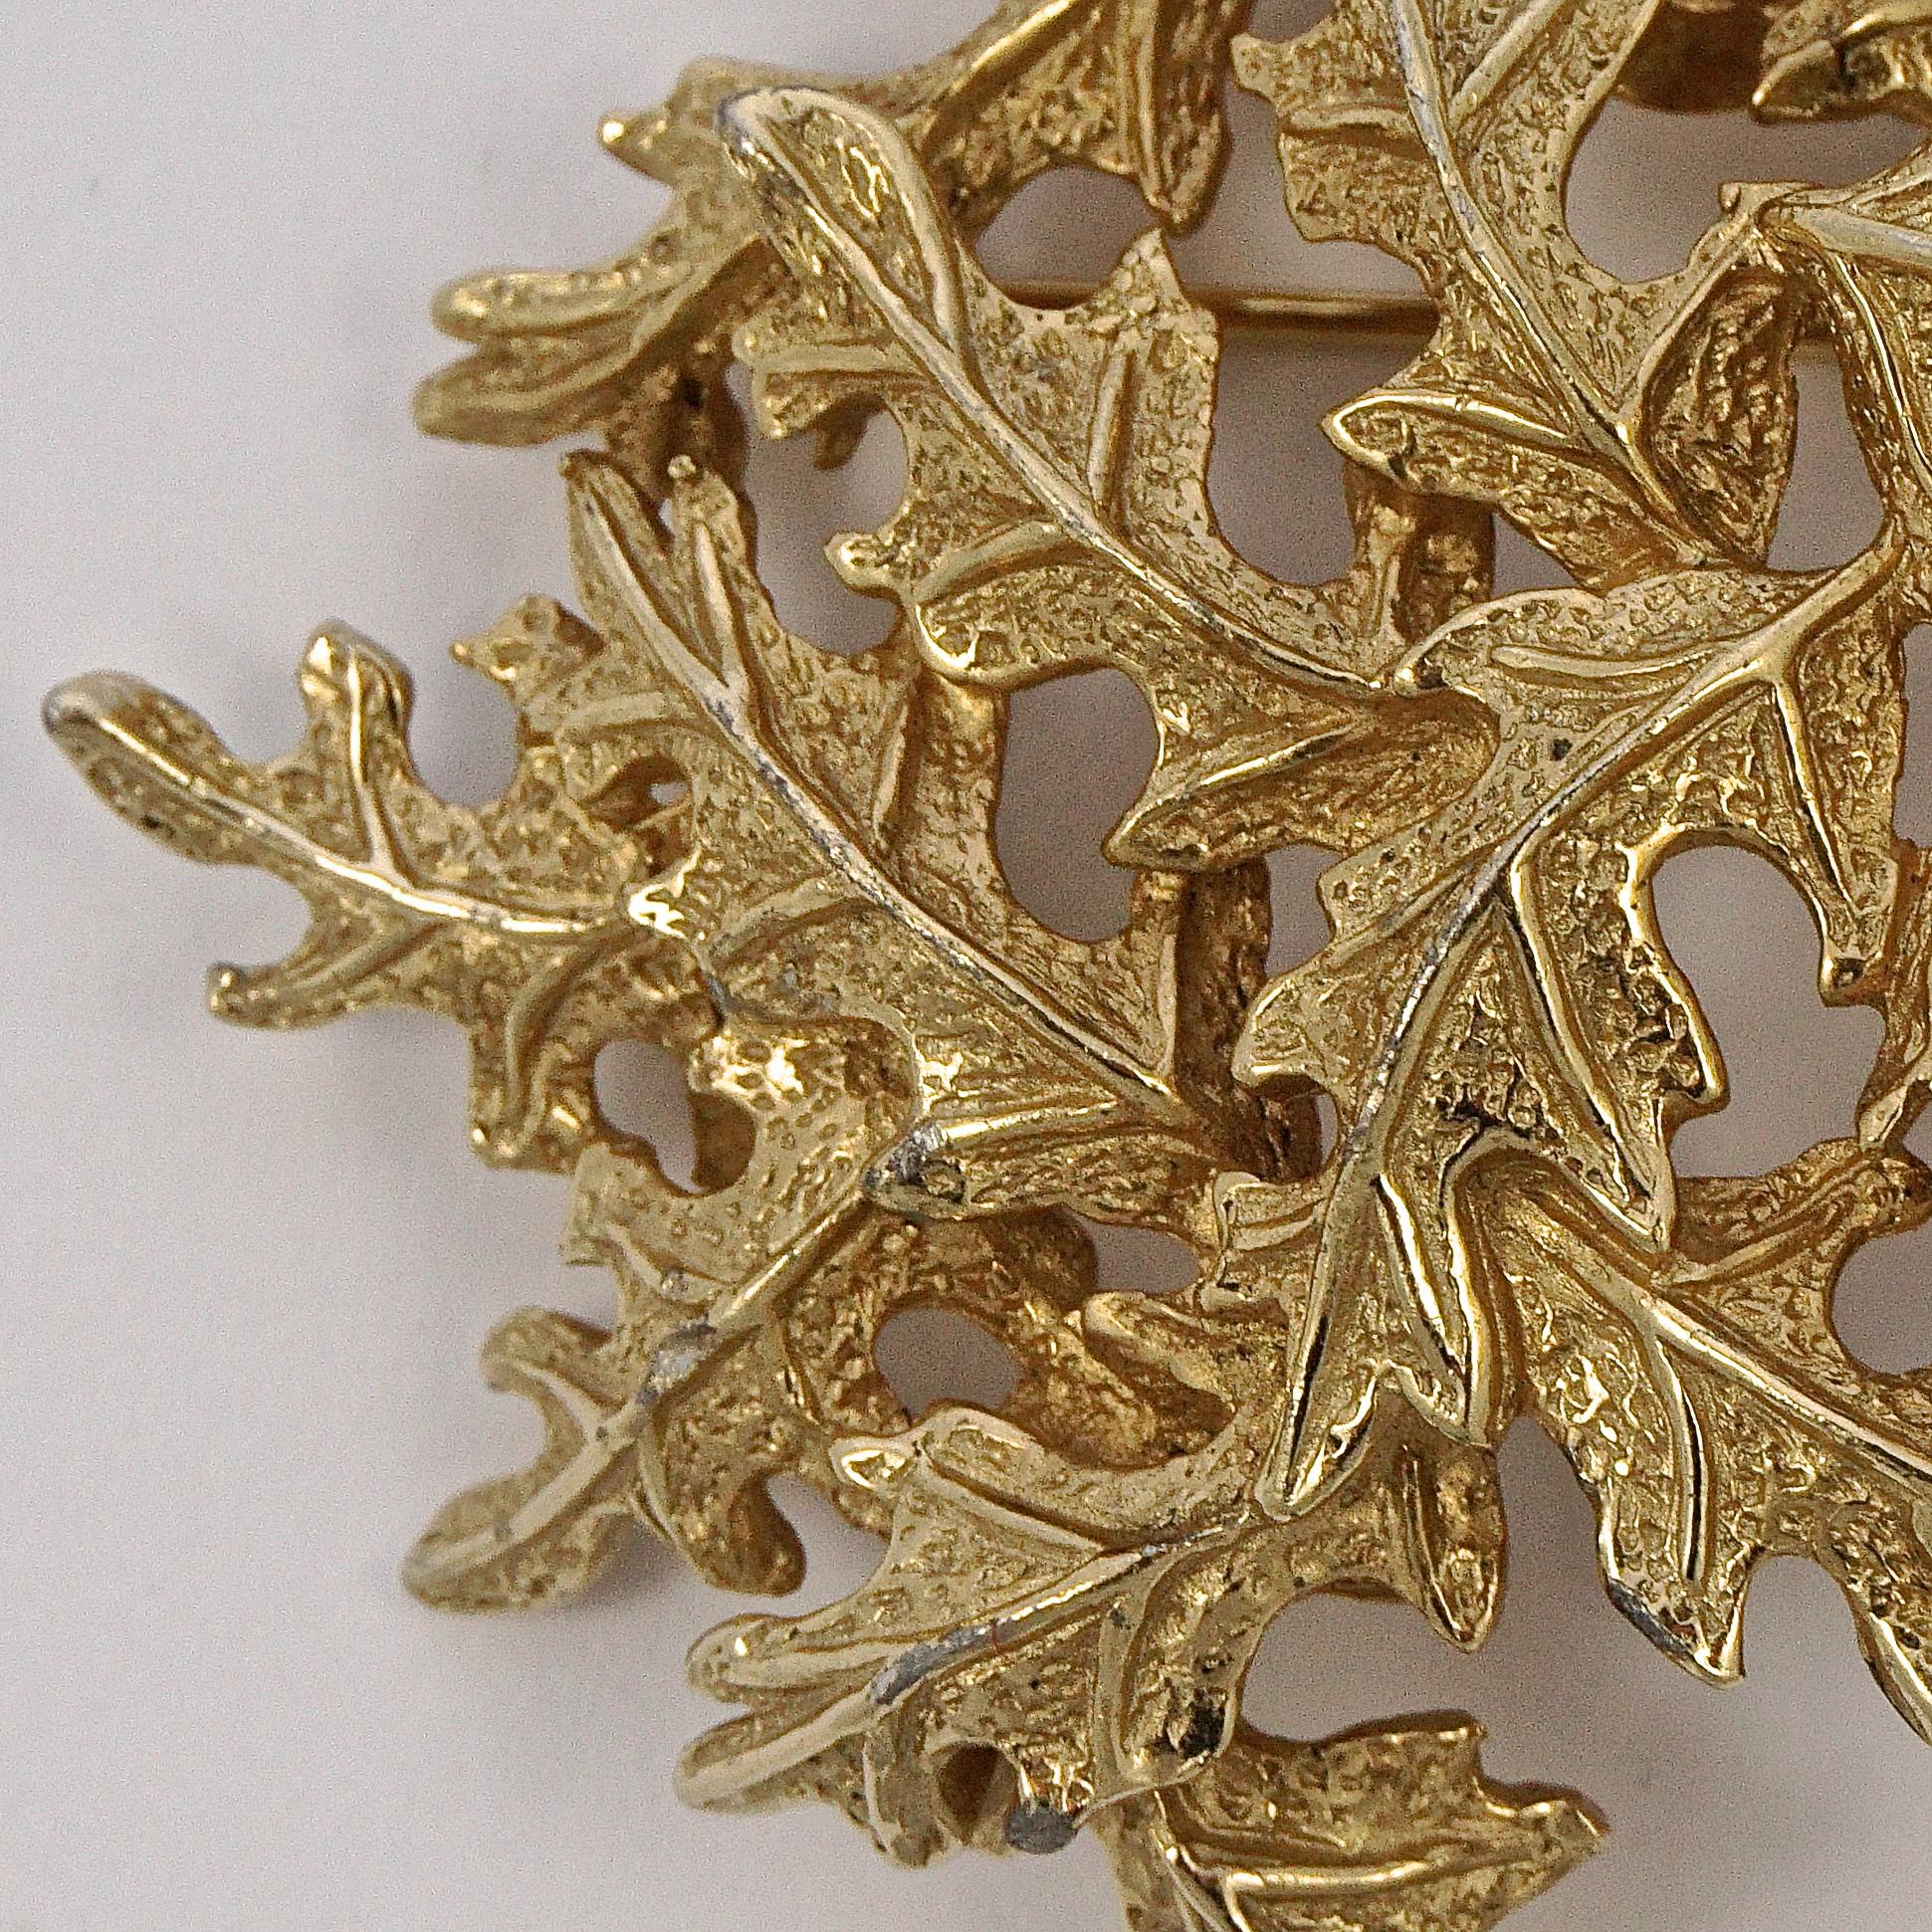 Castlecliff gold plated brooch with a lovely oak leaves design, it is slightly dome shaped. Measuring width 5.8cm / 2.28 inches by 4.5cm / 1.77 inches. The clasp works well.

This beautiful vintage statement brooch would look lovely for everyday